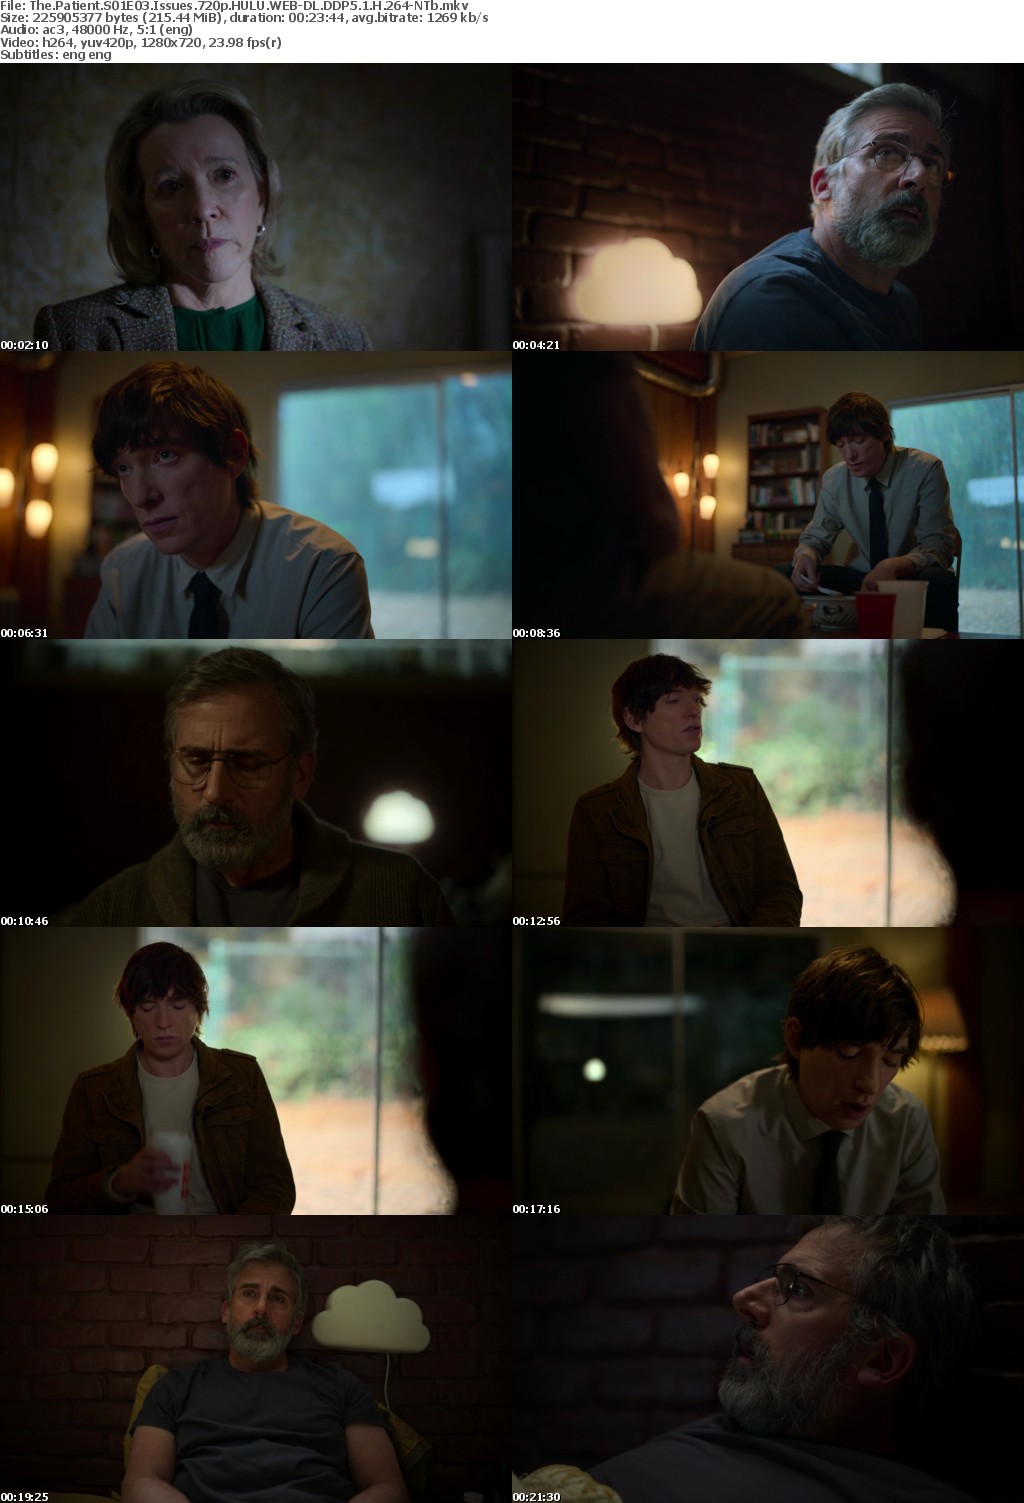 The Patient S01E03 Issues 720p HULU WEBRip DDP5 1 x264-NTb